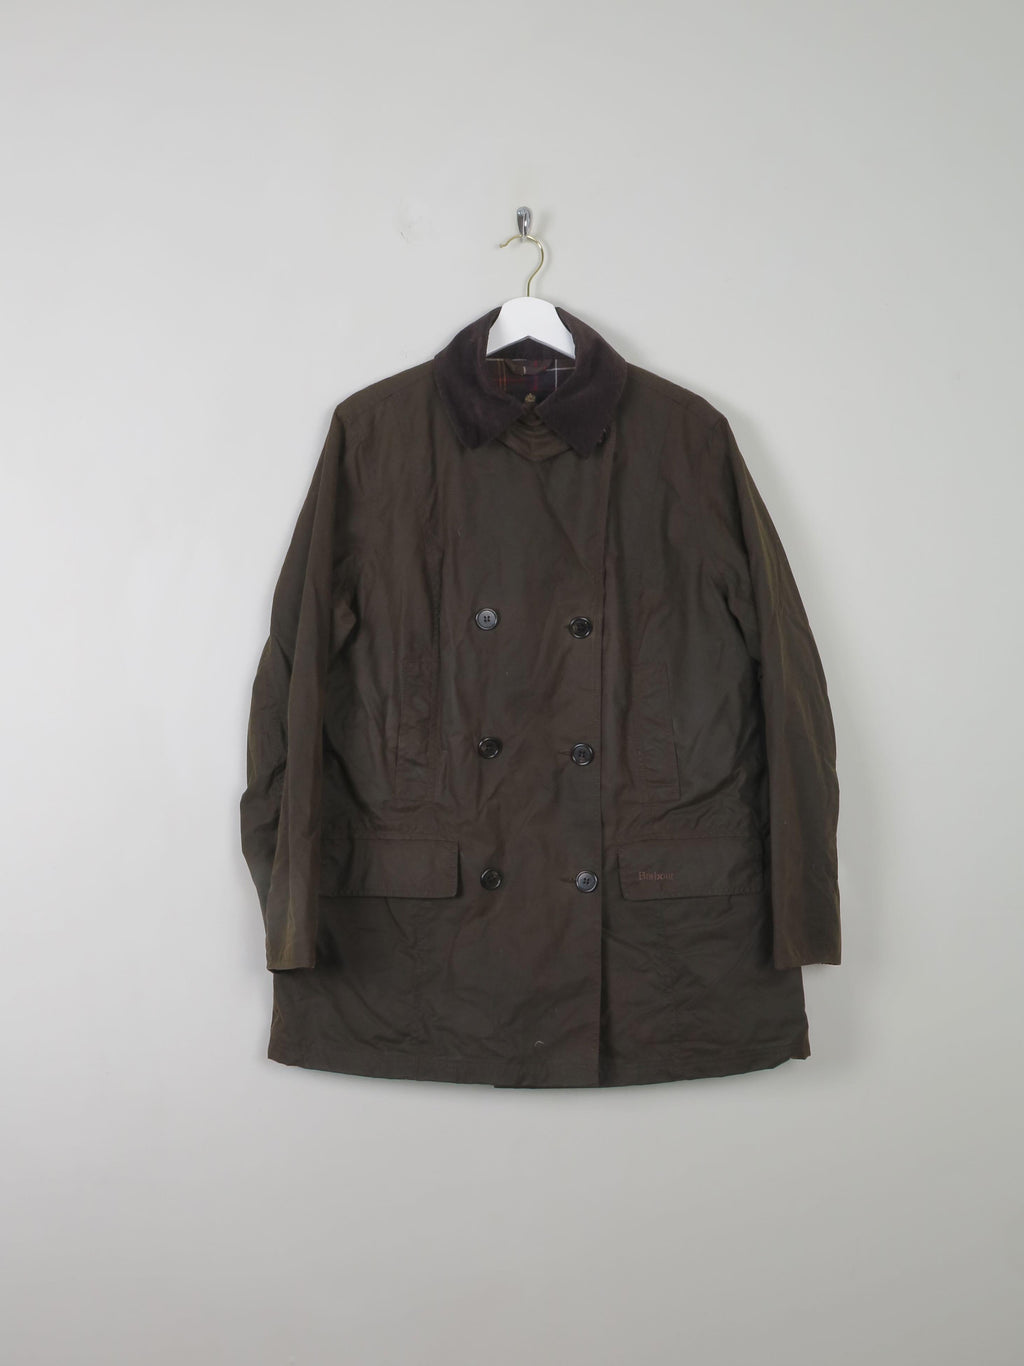 Women's Barbour Waxed Jacket 16 - The Harlequin